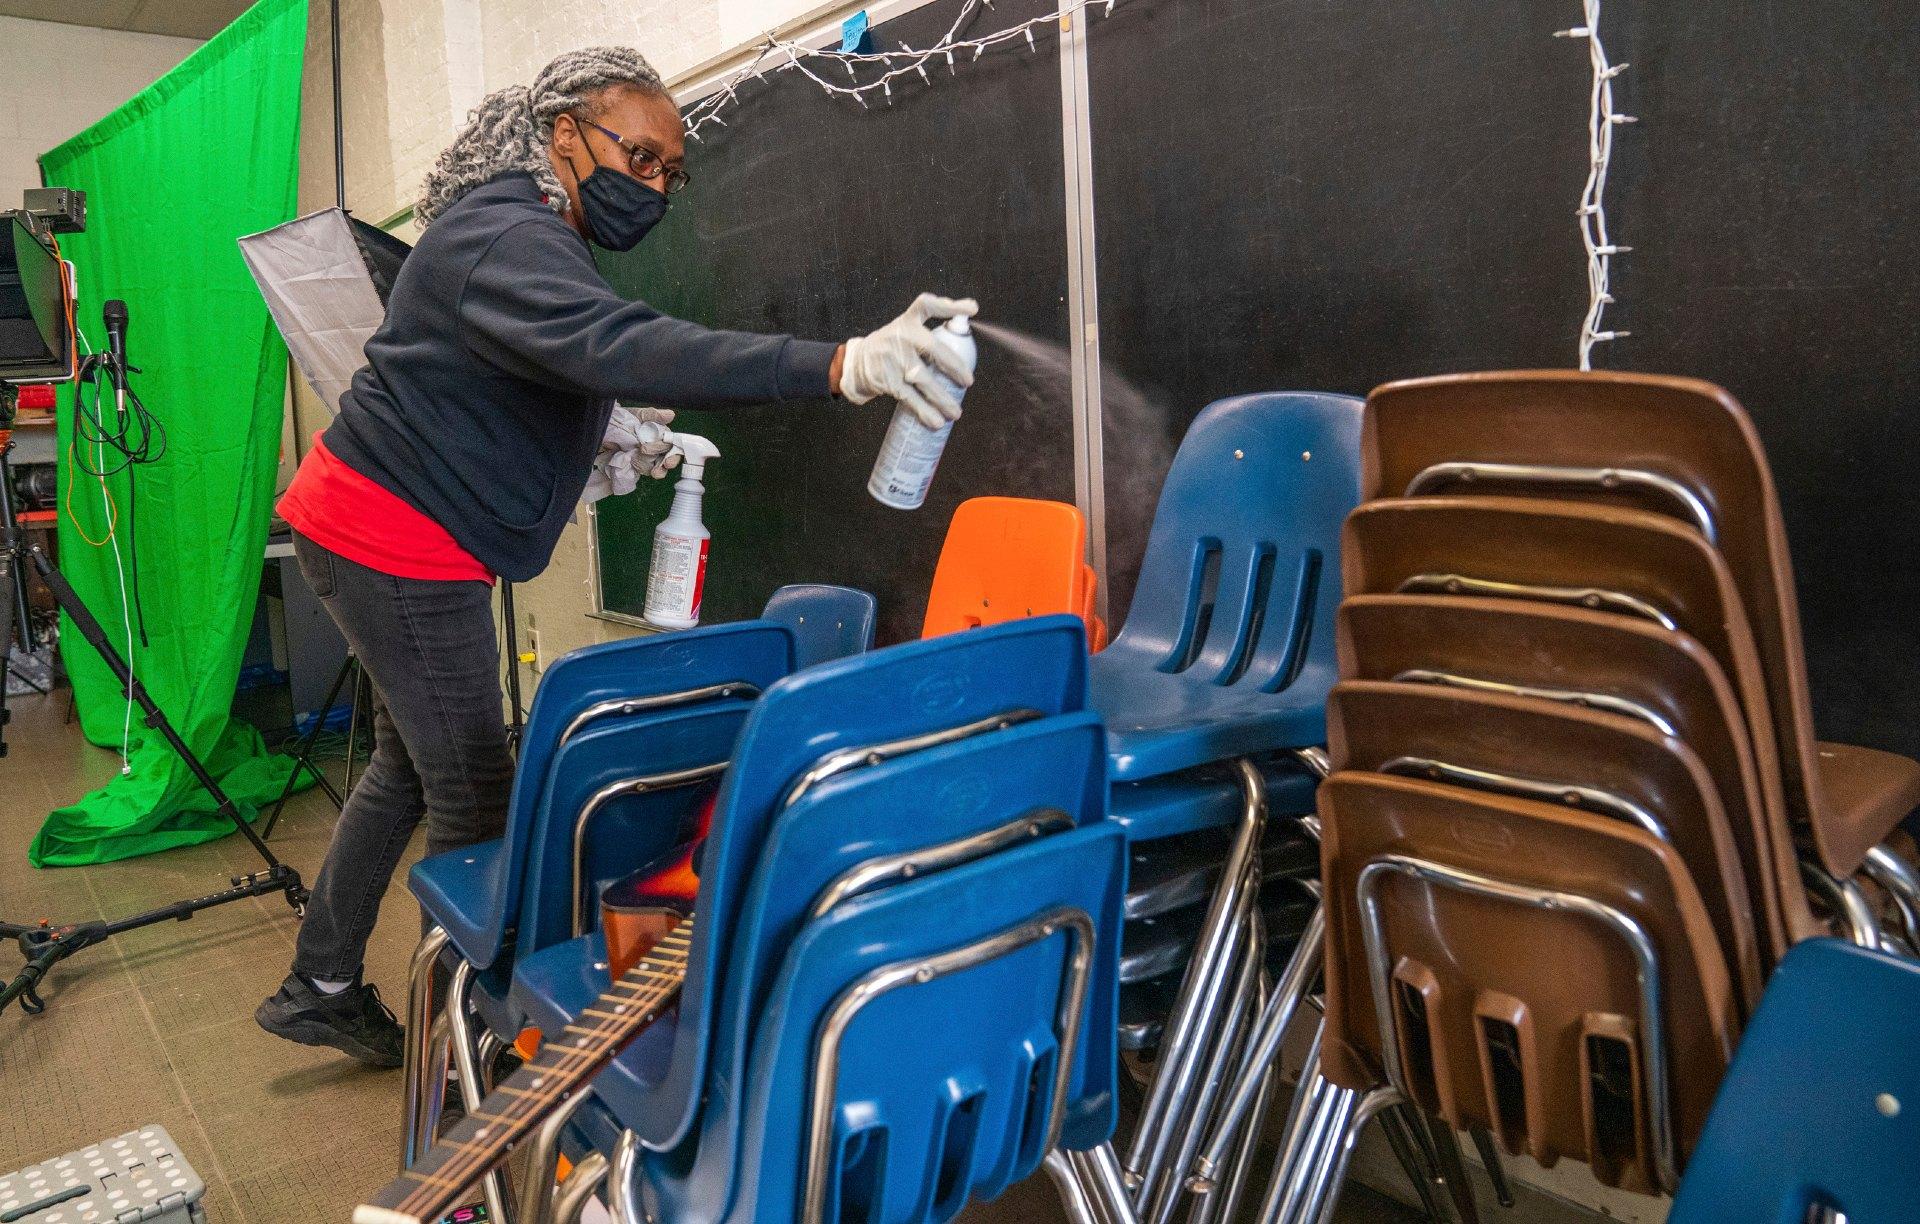 In this Thursday, March 4, 2021, file photo, Latisha Bledsoe cleans chairs in the music room at Manchester Academic Charter School during the coronavirus pandemic in Pittsburgh. The school is planning to return students to the classroom in a hybrid schedule at the end of March. (Andrew Rush / Pittsburgh Post-Gazette via AP, File)